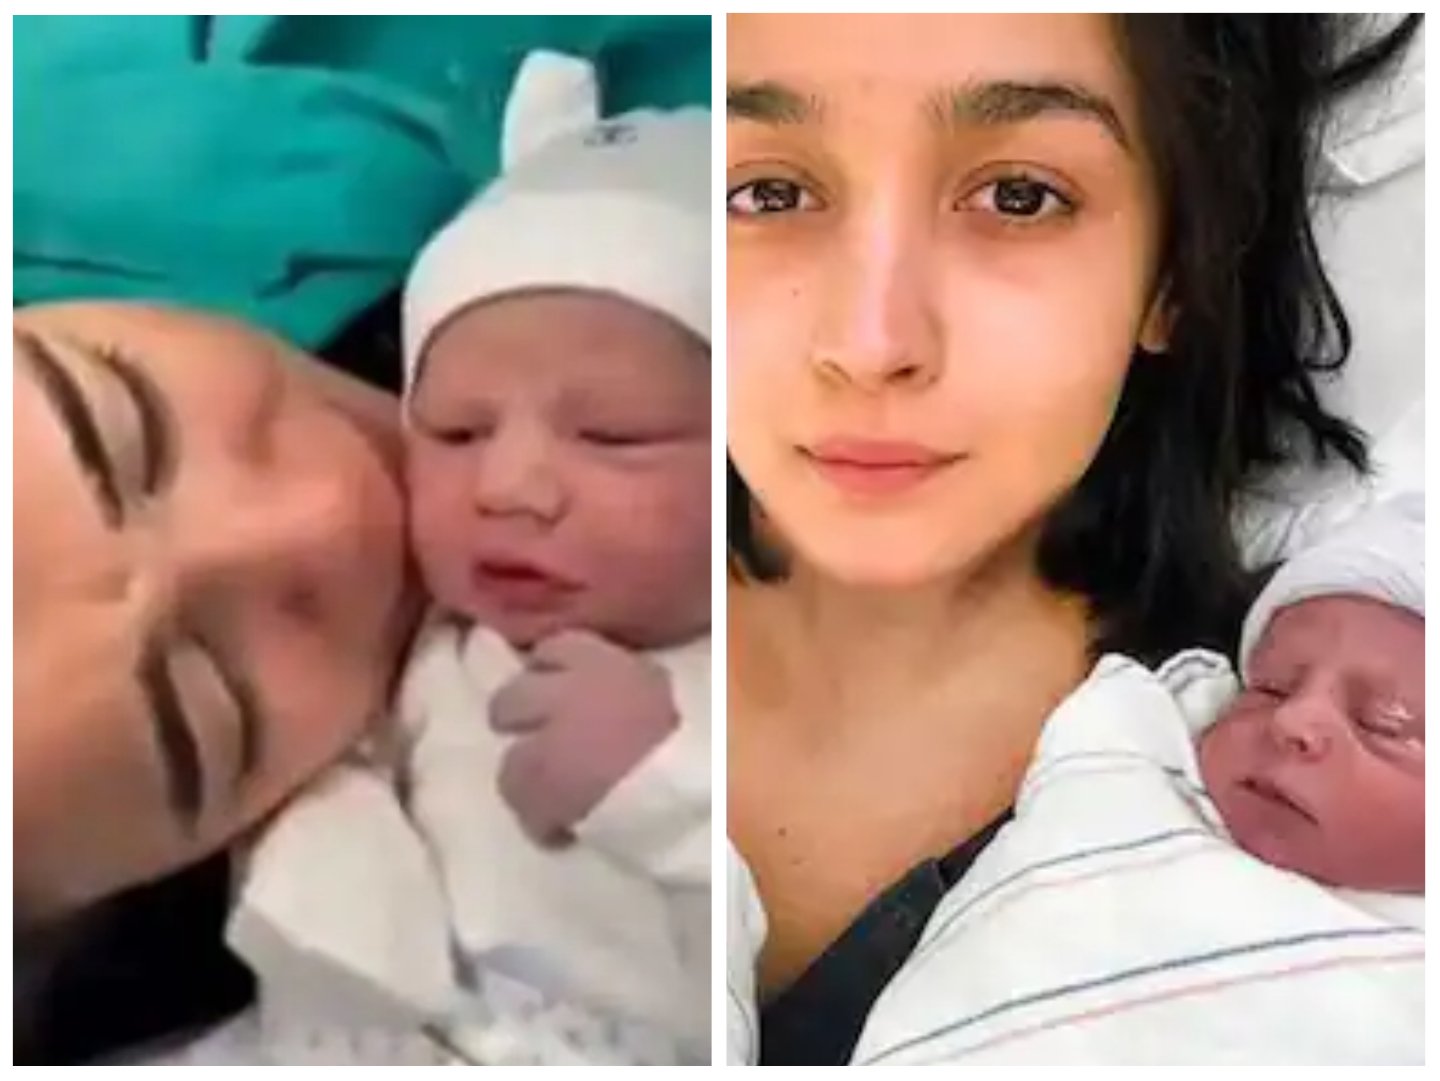 Alia Bhatt and her baby's morphed pictures